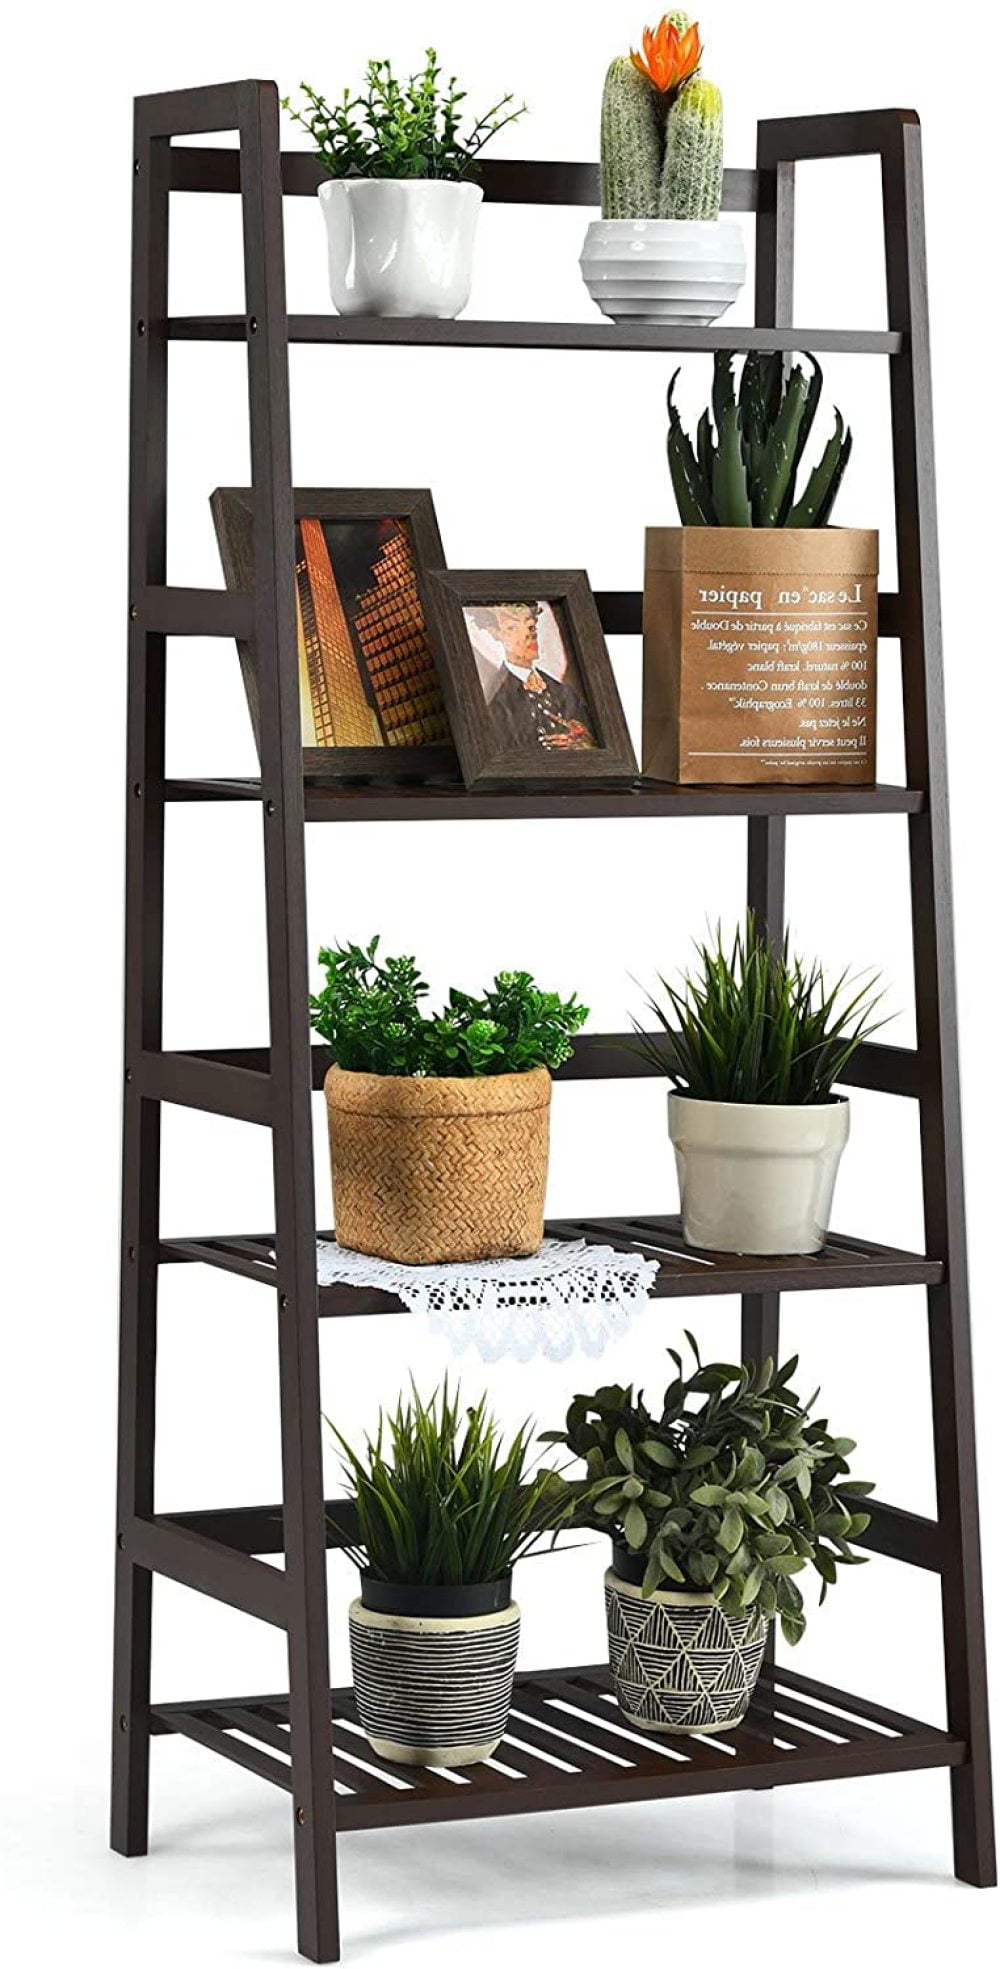 Brown Giantex 3 Tier Ladder Shelf Bamboo Plant Stand Indoor Outdoor Multifunctional Bookcase Ladder Planter Storage Shelving Unit for Living Room Bathroom Patio Balcony Garden Office 